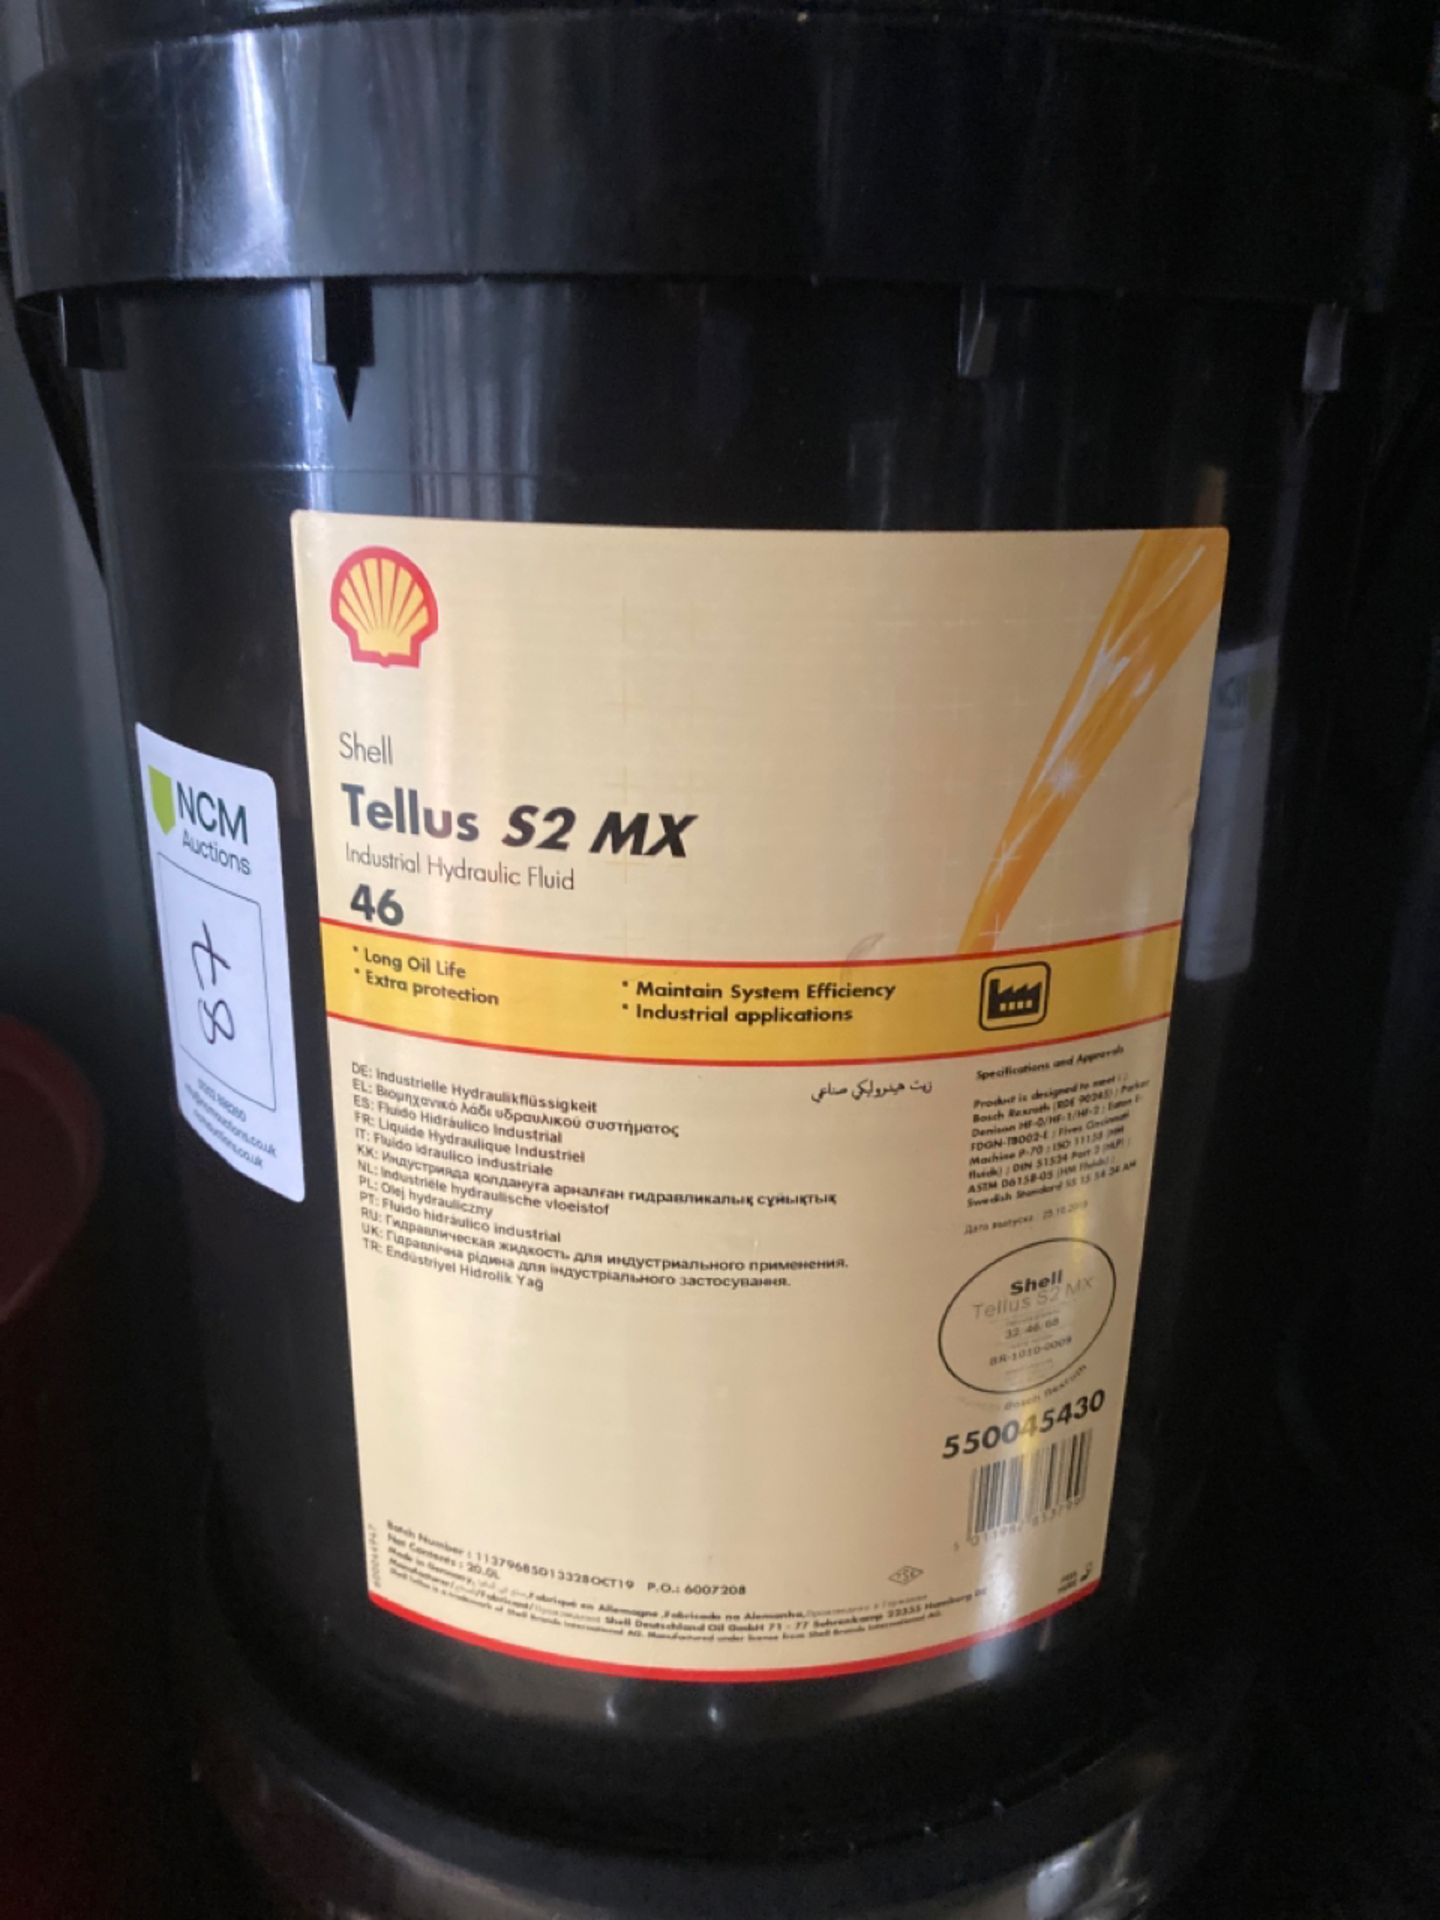 Shell Tellus S2 MX - Image 2 of 2